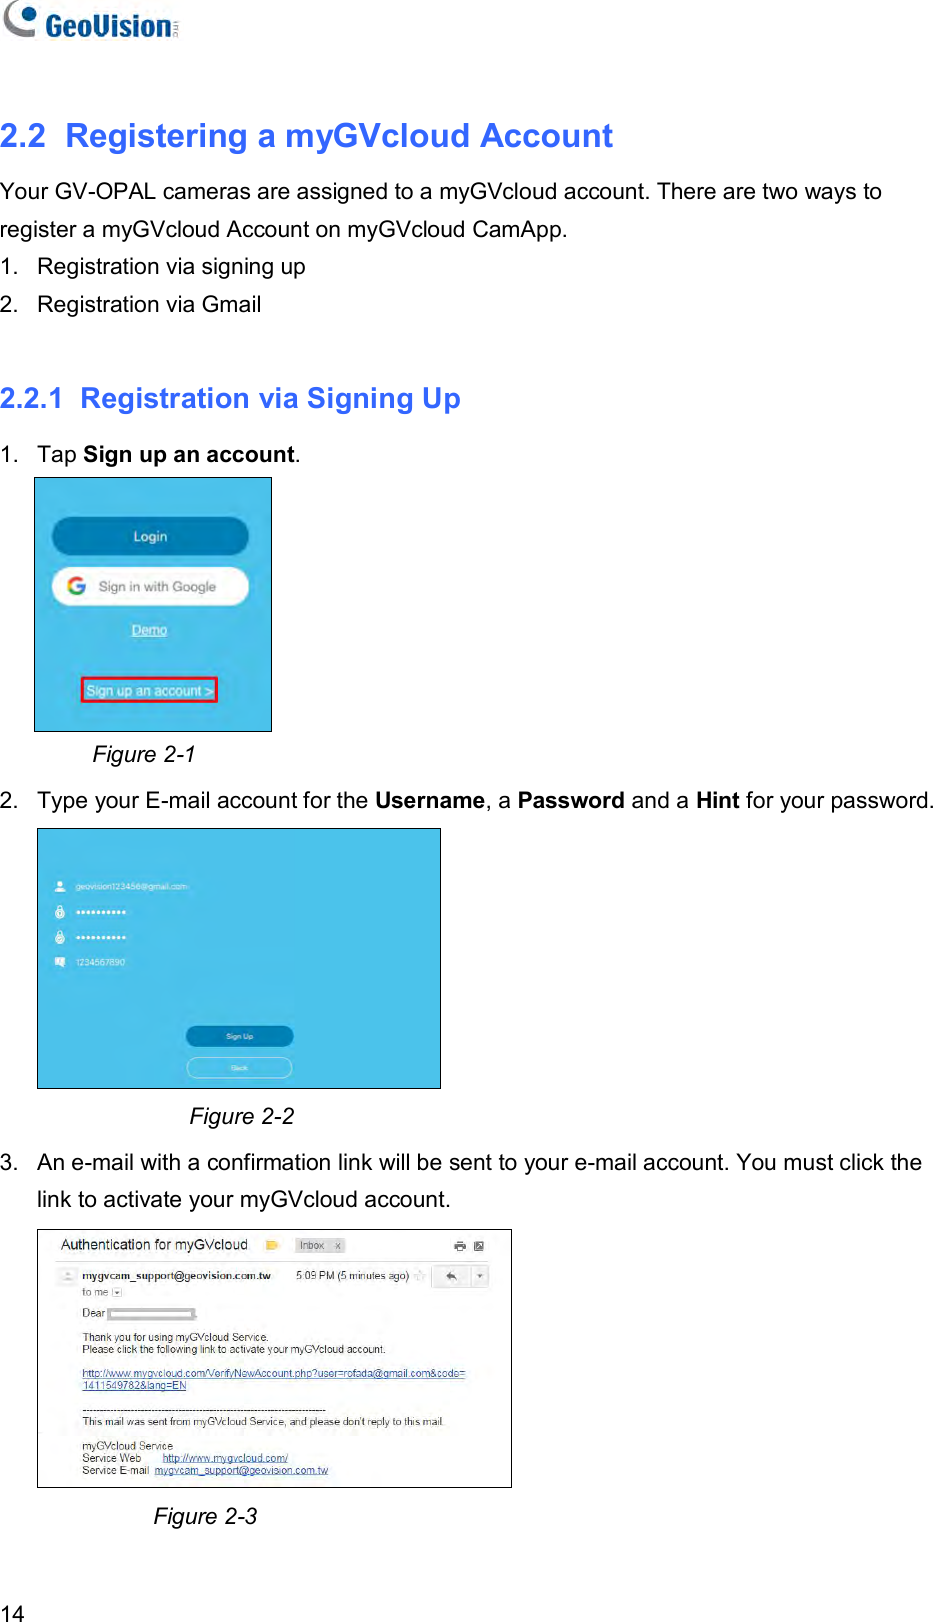   14 2.2  Registering a myGVcloud Account Your GV-OPAL cameras are assigned to a myGVcloud account. There are two ways to register a myGVcloud Account on myGVcloud CamApp. 1.  Registration via signing up 2.  Registration via Gmail  2.2.1  Registration via Signing Up 1.  Tap Sign up an account.           Figure 2-1 2.  Type your E-mail account for the Username, a Password and a Hint for your password.    Figure 2-2 3.  An e-mail with a confirmation link will be sent to your e-mail account. You must click the link to activate your myGVcloud account.                            Figure 2-3  